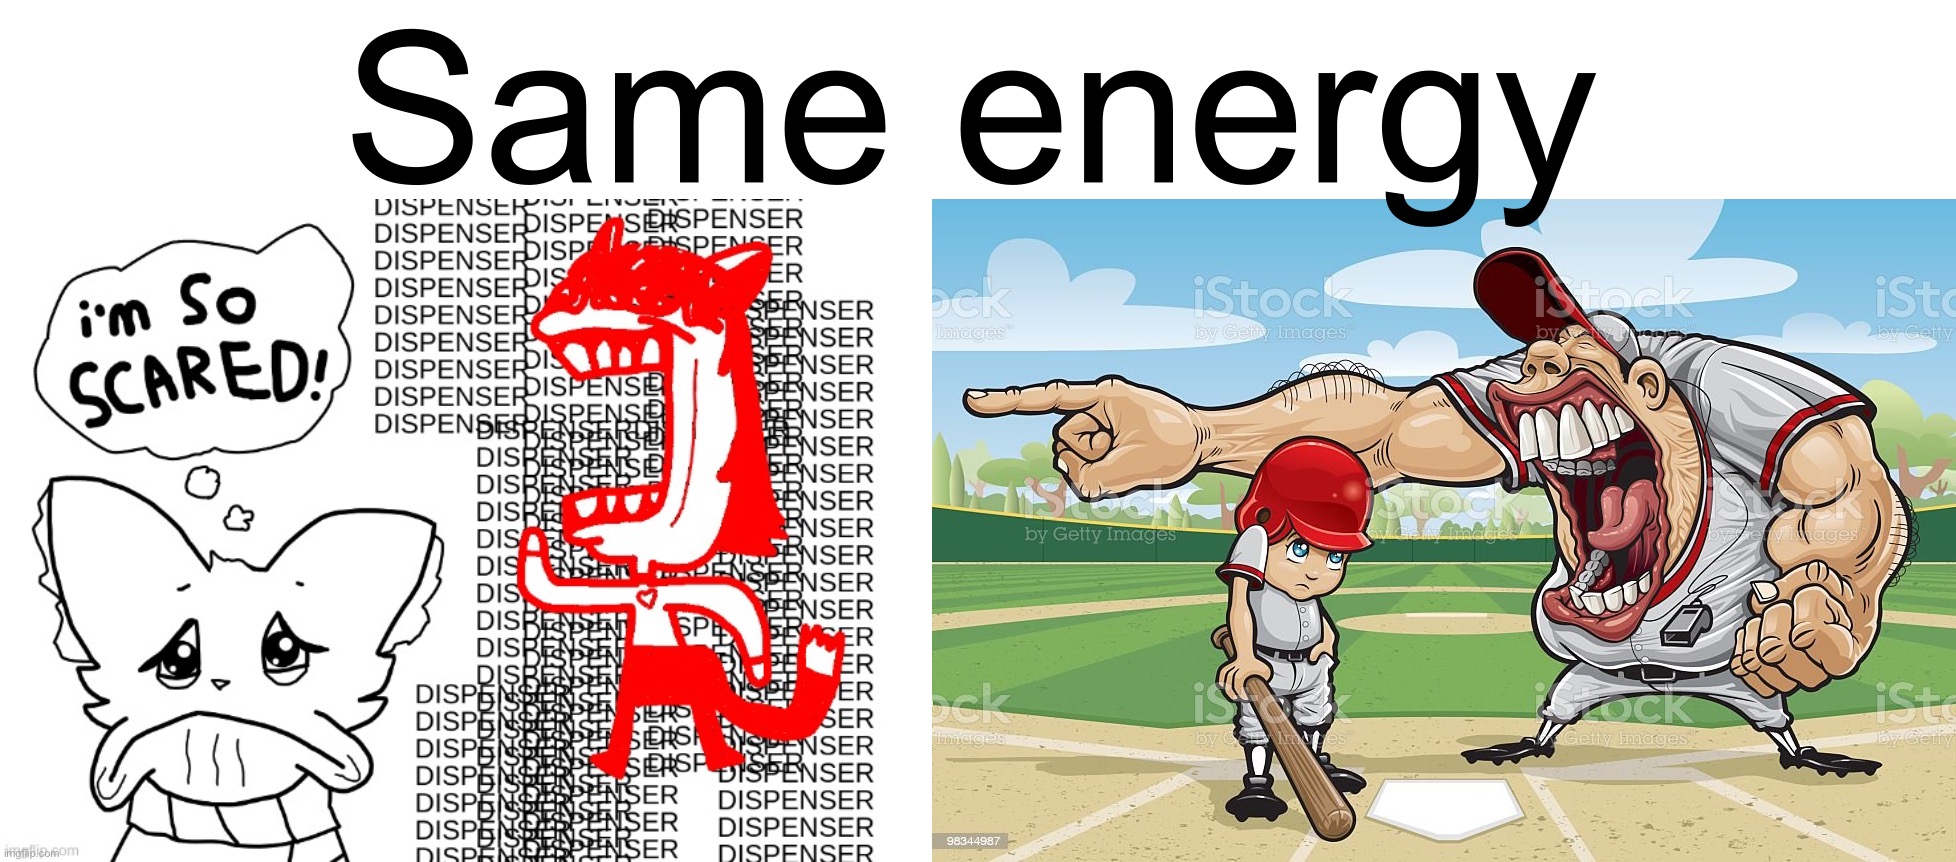 Same energy | image tagged in i'm so scared by emotionalsuportbee,baseball coach yelling at kid | made w/ Imgflip meme maker